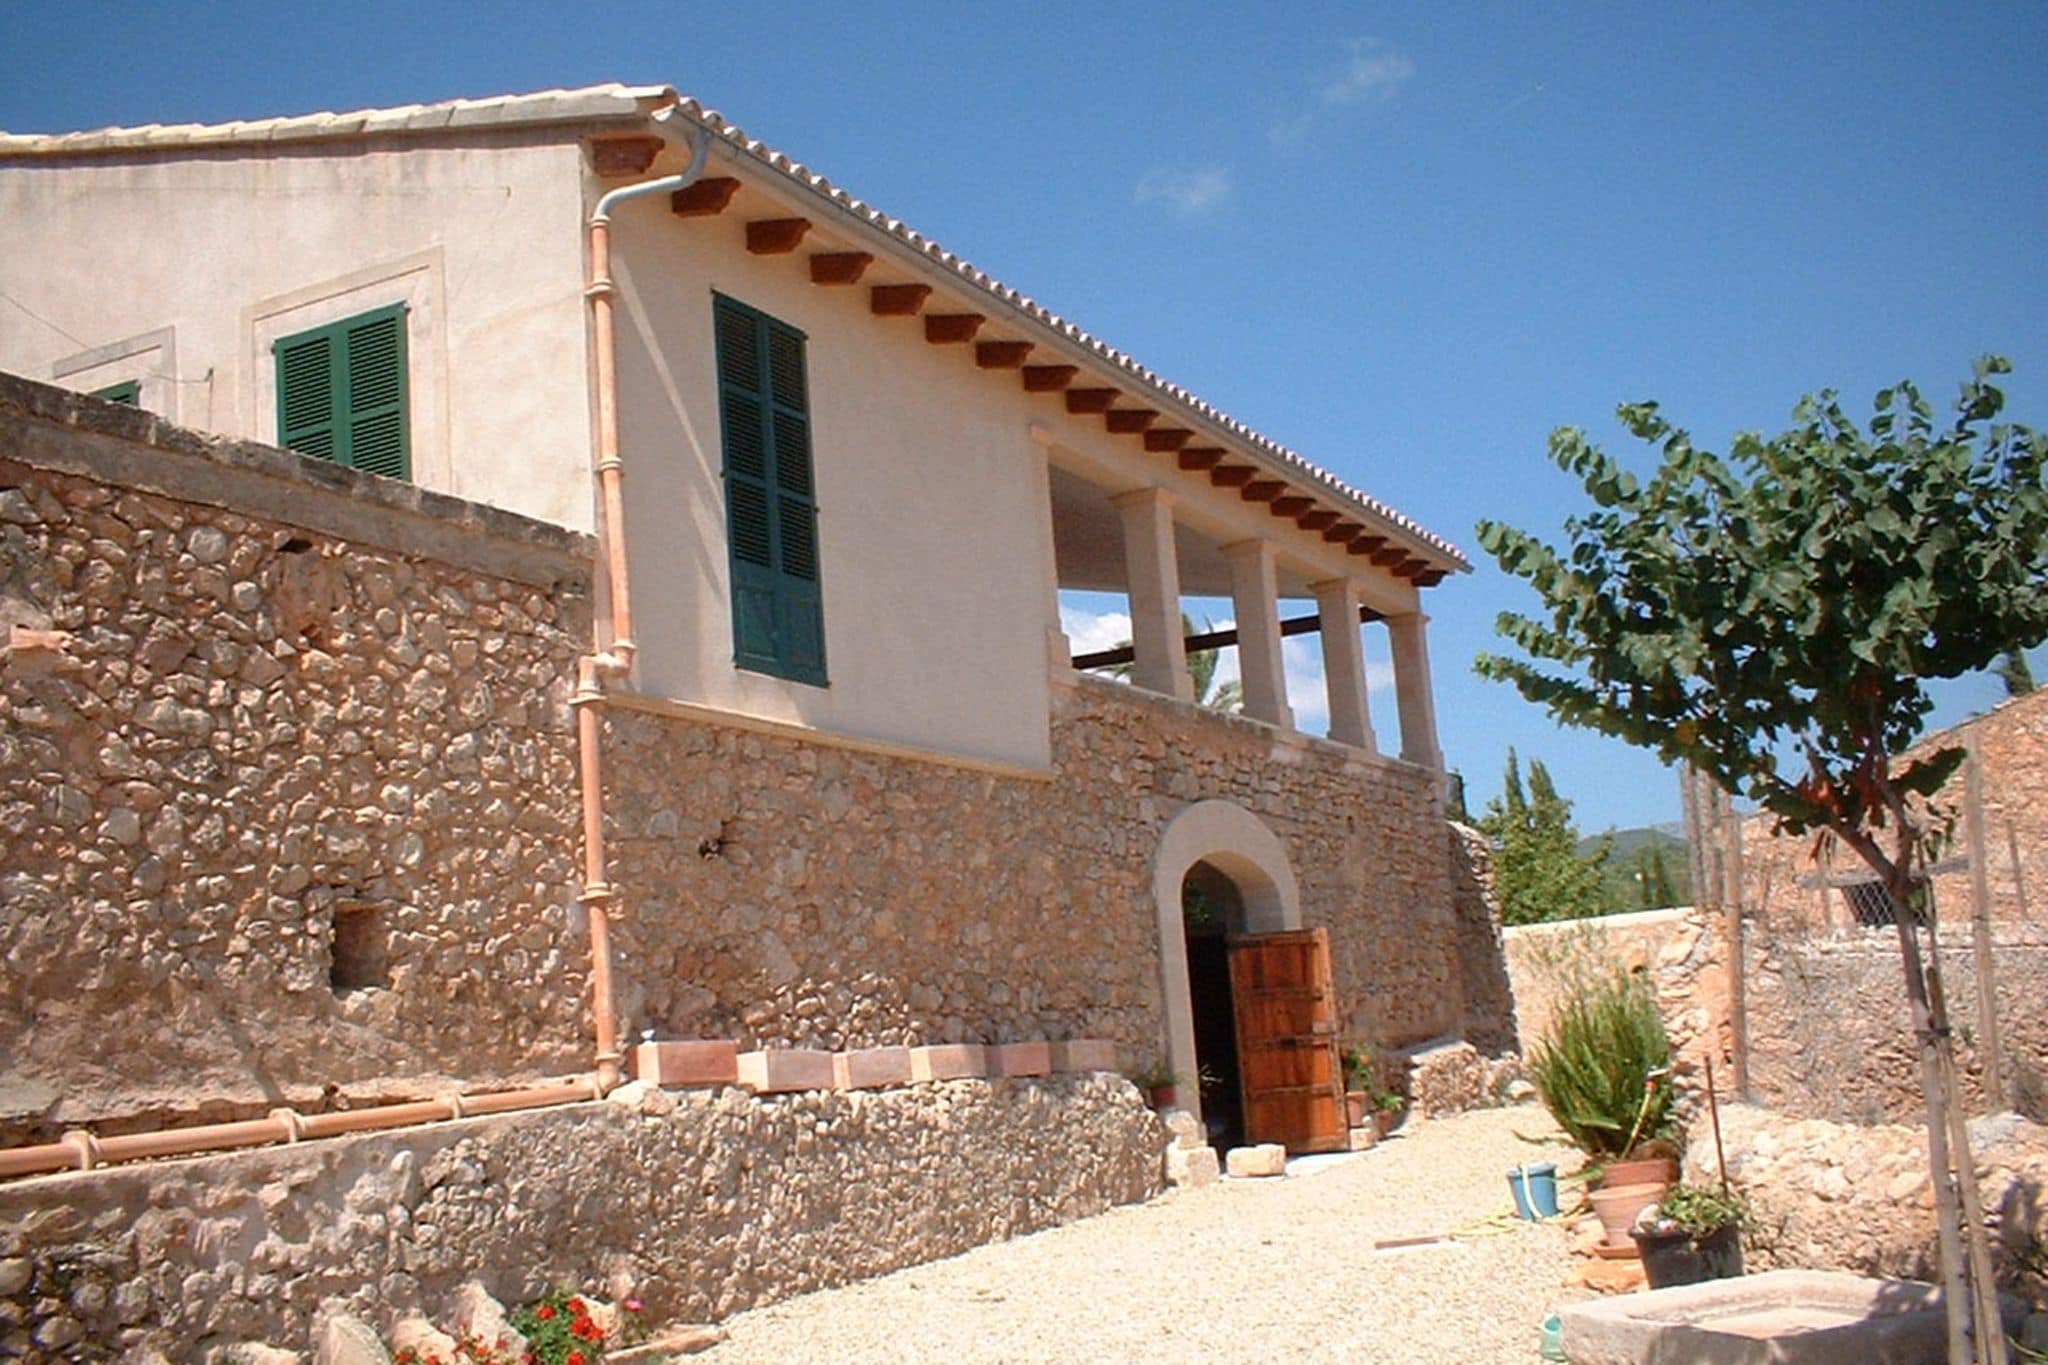 Beautiful old finca with private pool close to the nice village of Alaró